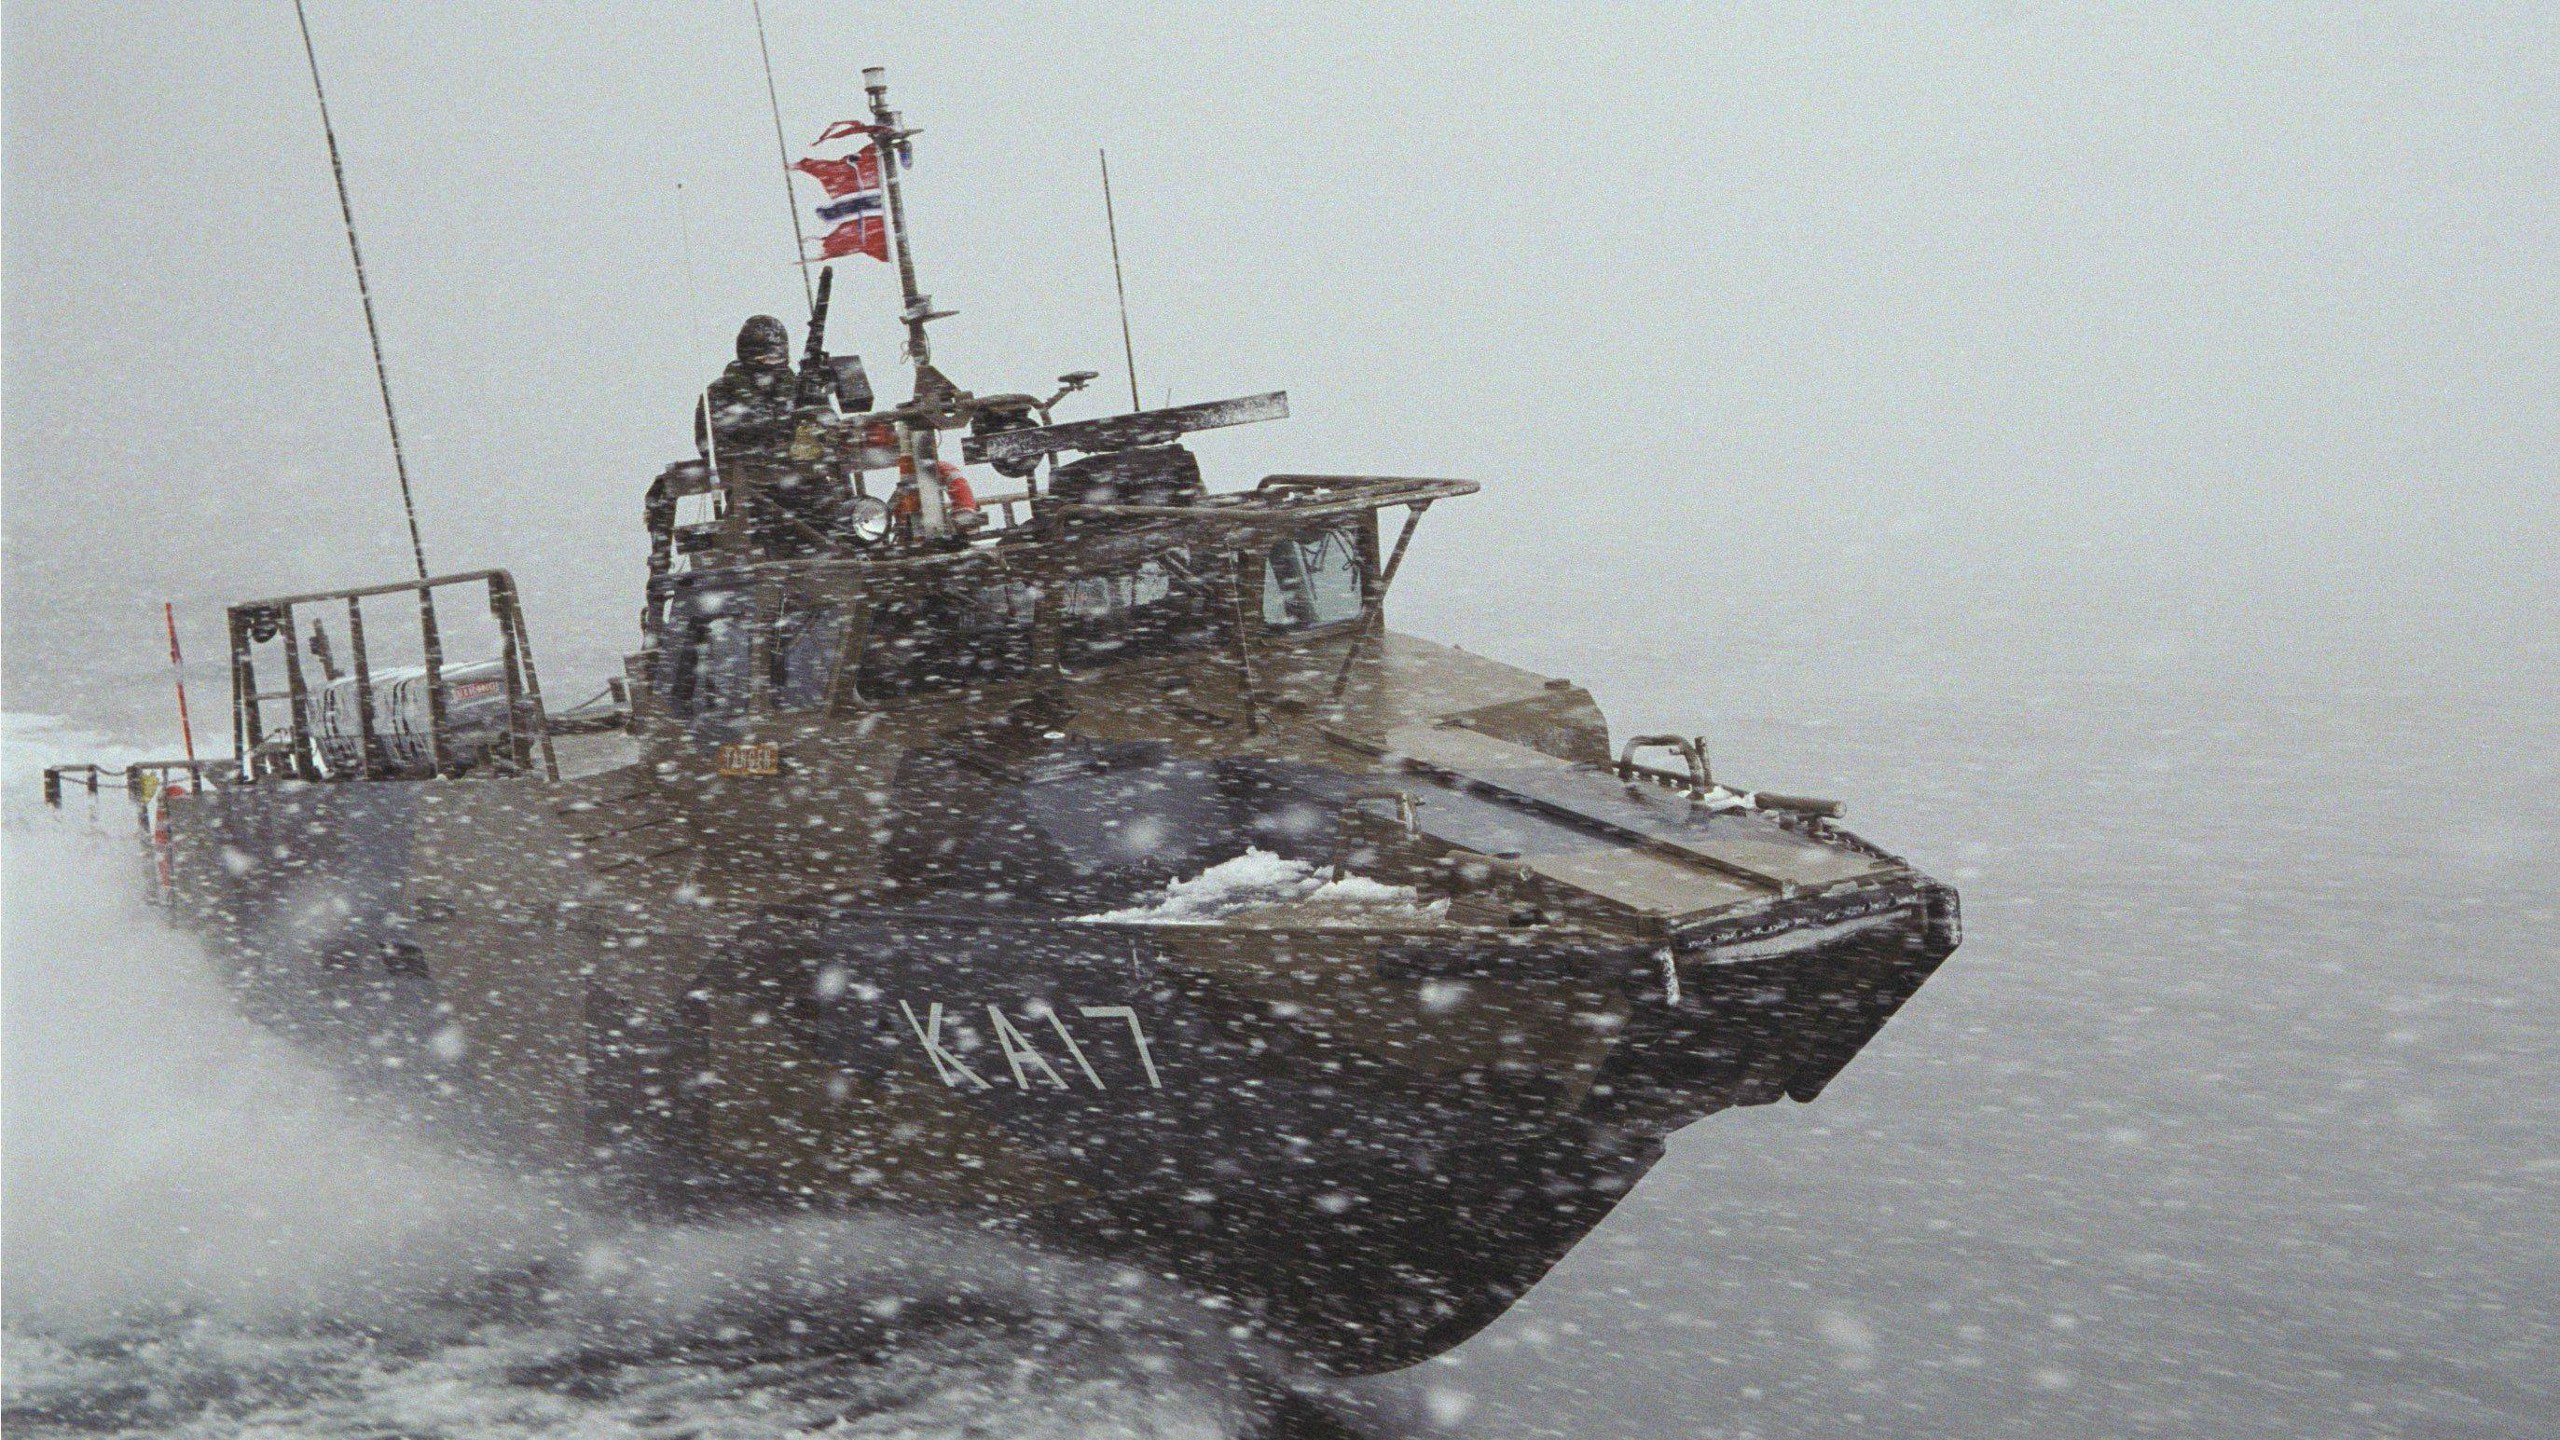 General 2560x1440 military Norway boat military vehicle vehicle